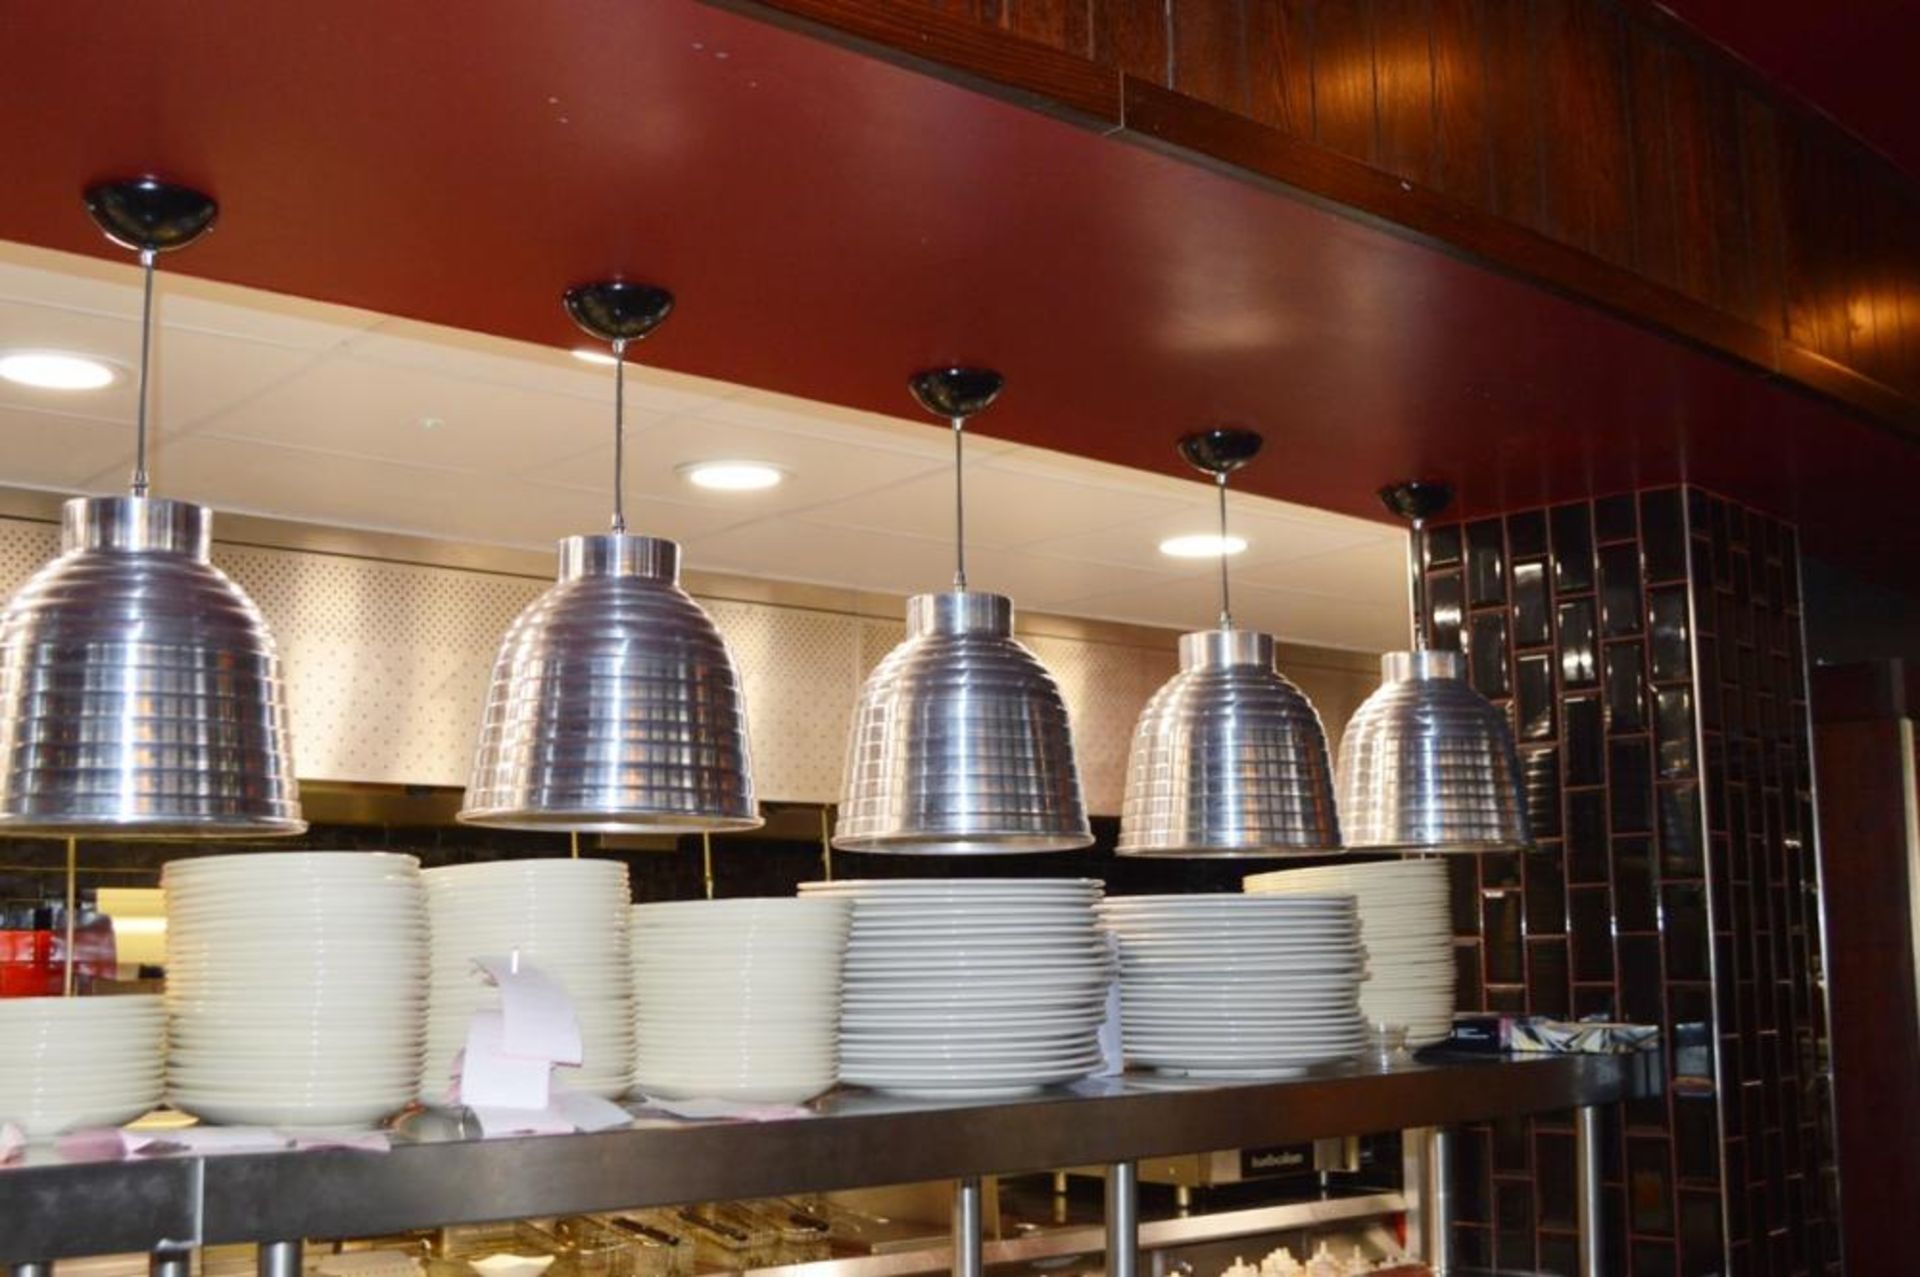 9 x Suspended Food Warming Lamps With Ribbed Chrome Design - CL390 - Location: Altrincham WA14 This - Image 2 of 6